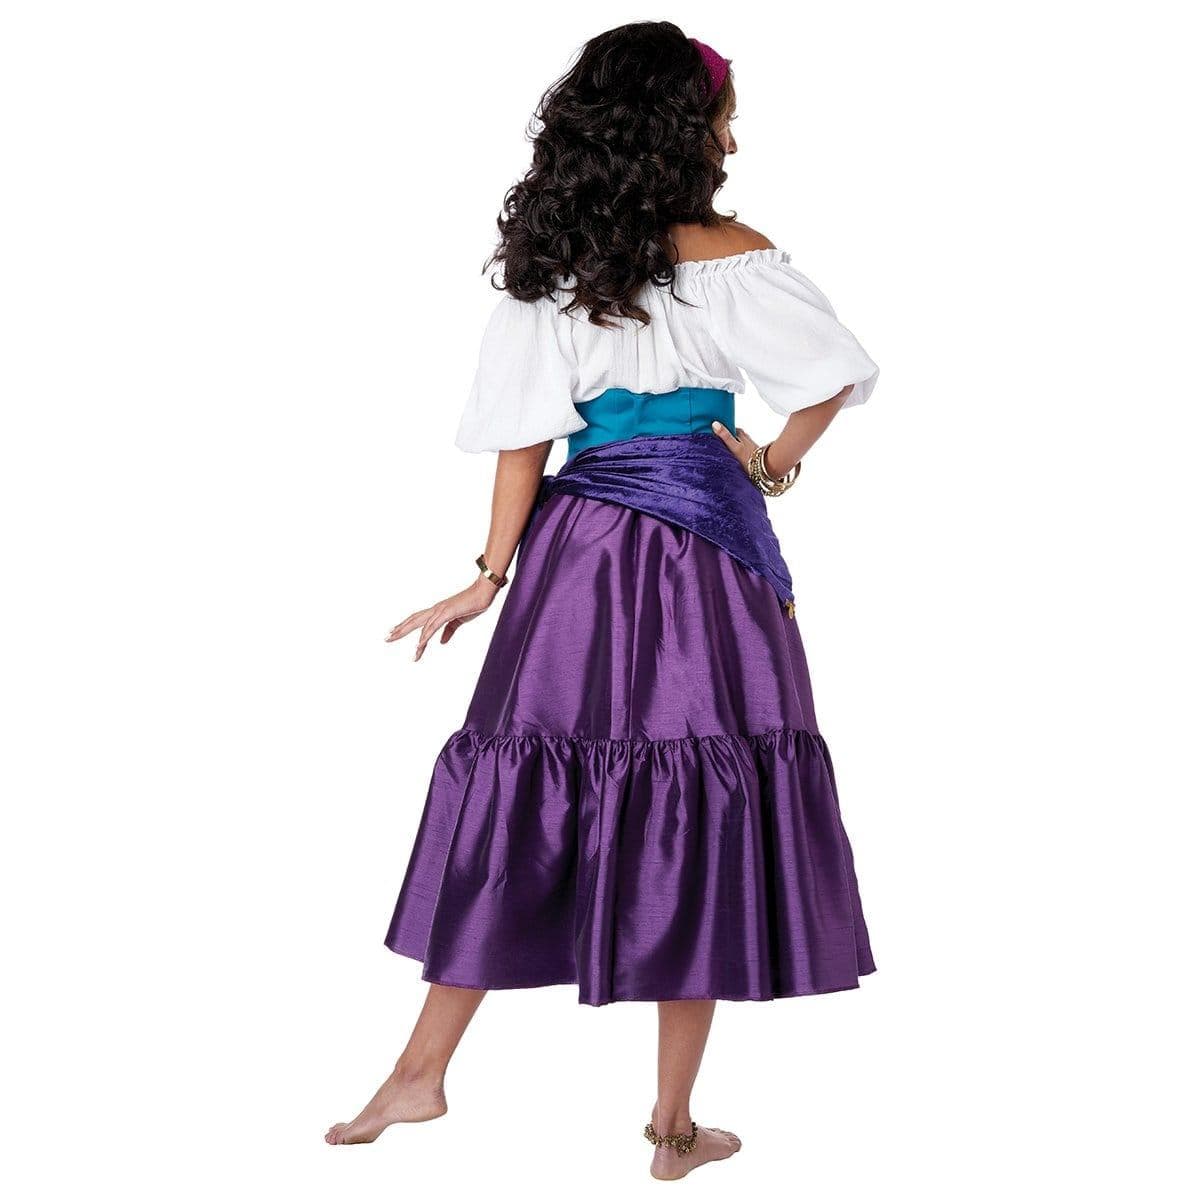 ✨DIY PLUS SIZE #DISNEY PRINCESS COSTUME✨ This Esmeralda costume cost about  $25 for me to #diy ! I had the sandals, skirt, and top alr